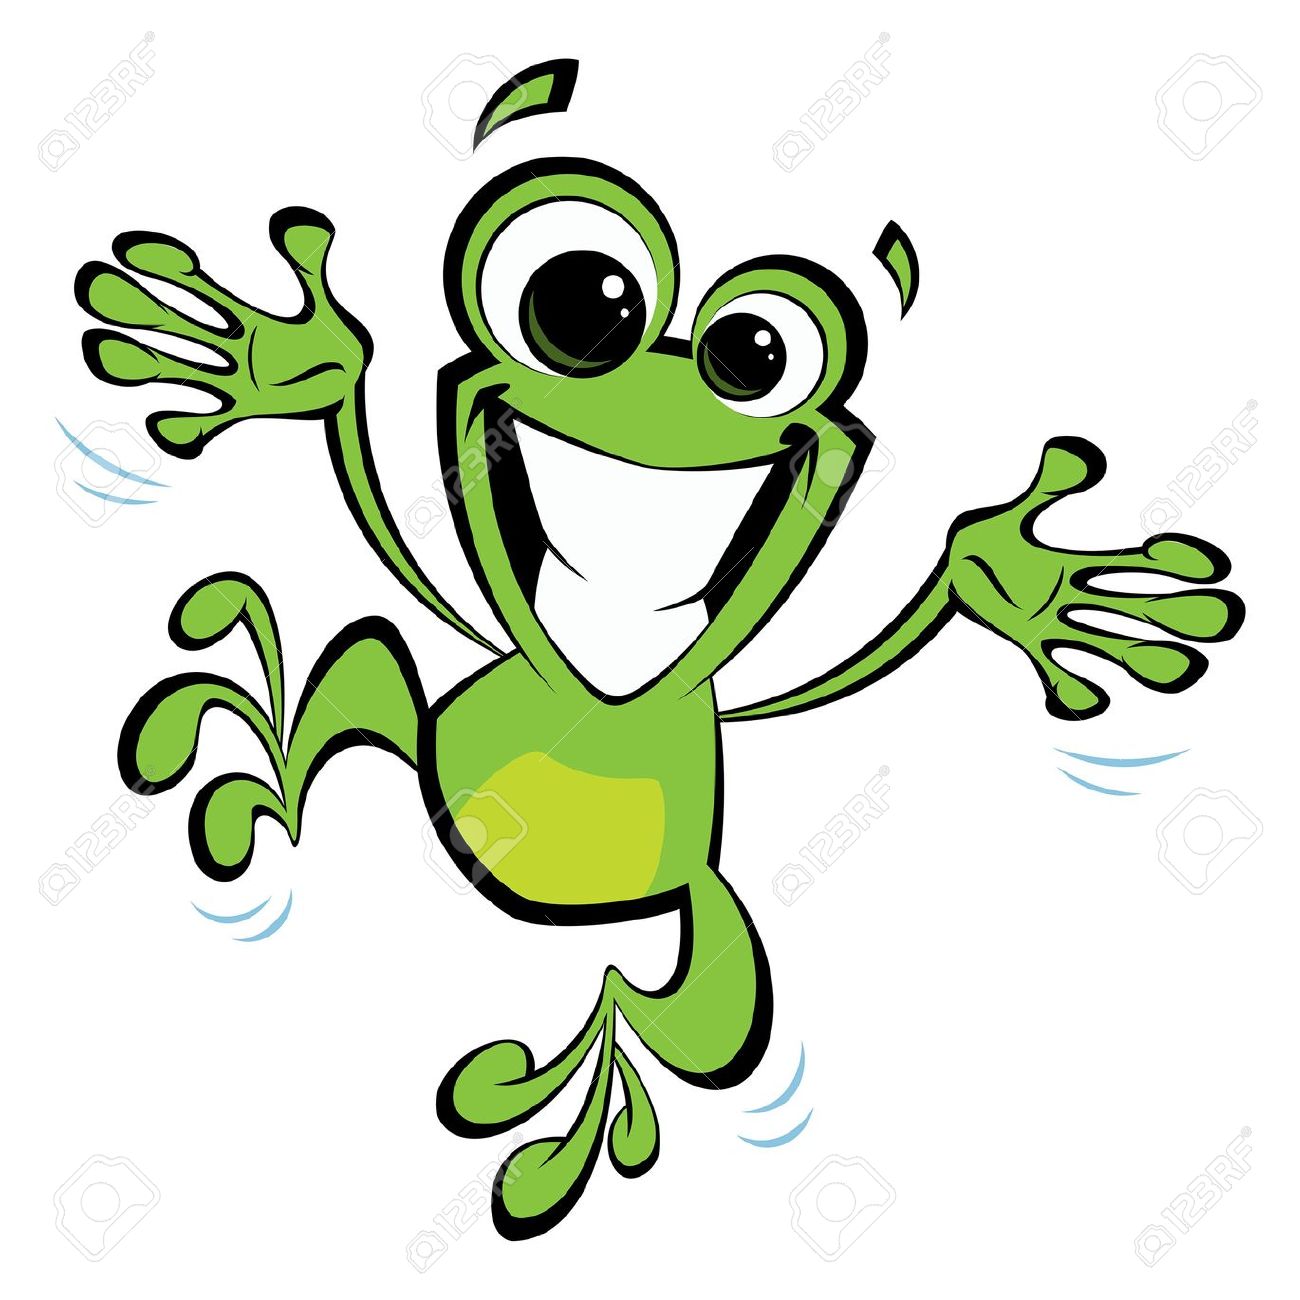 Happy Cartoon Green Smiling Frog Jumping Excited And Spreading.